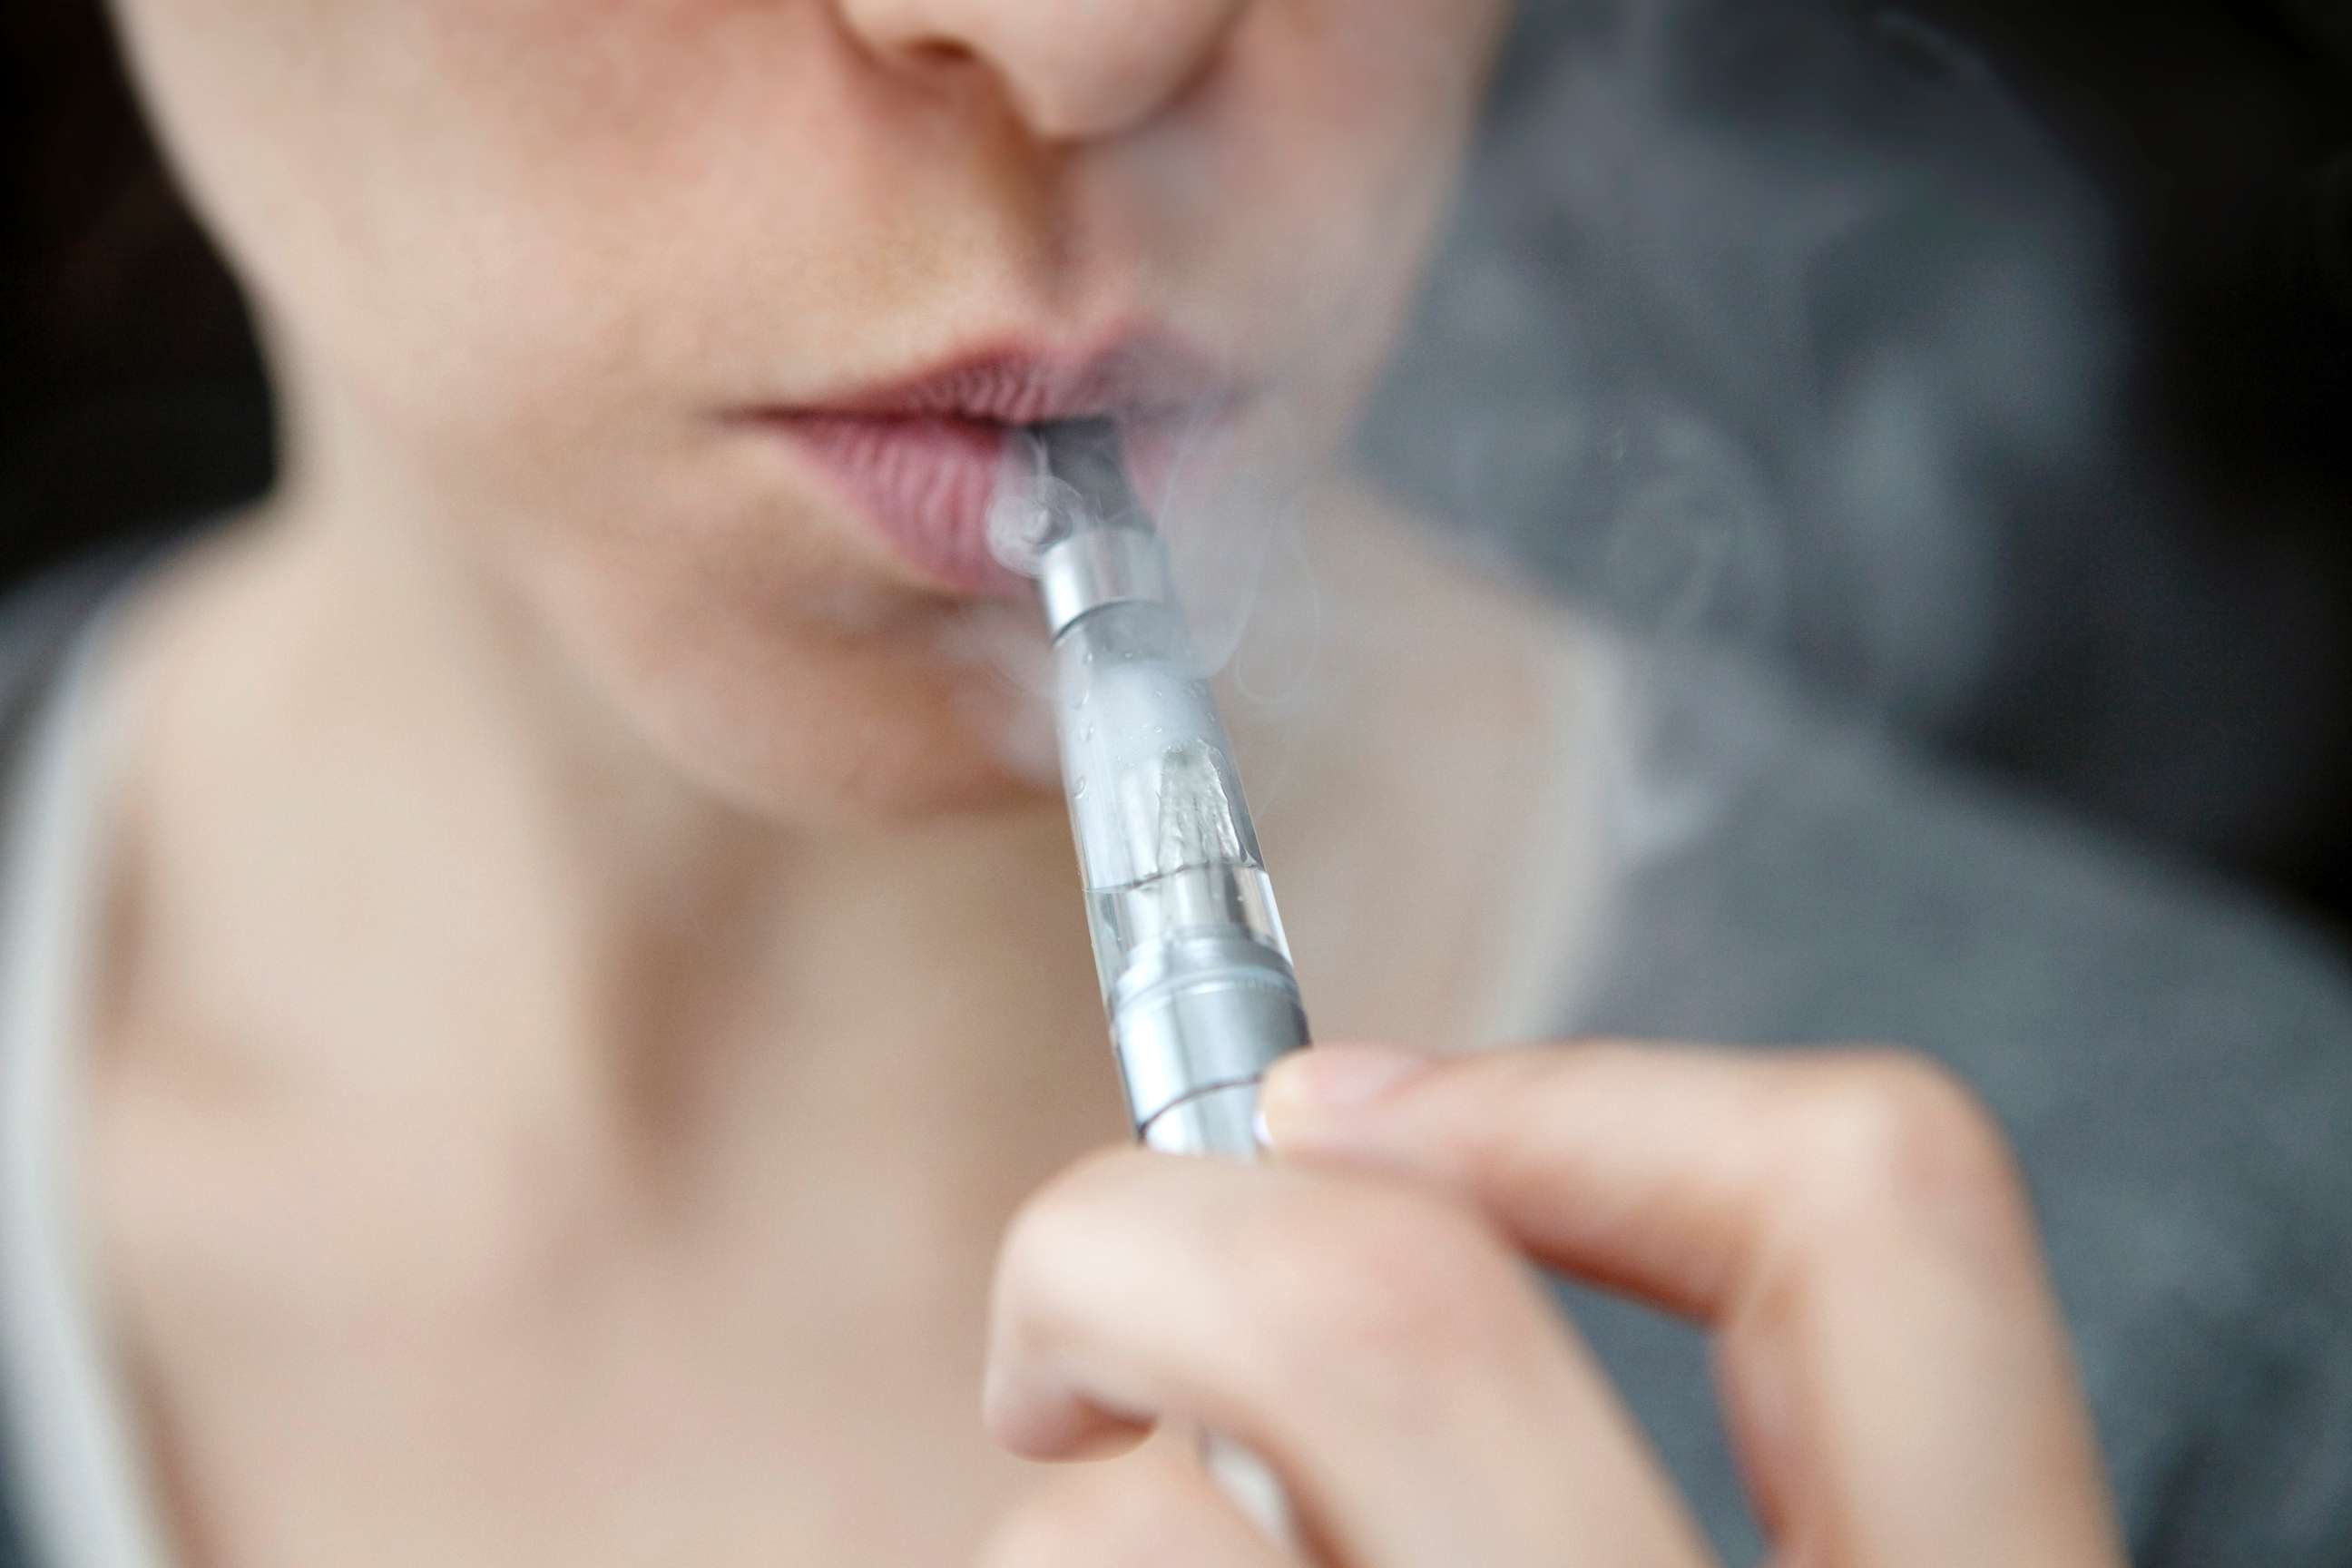 PHOTO: In this undated stock photo, a teen is smoking an e-cigarette.